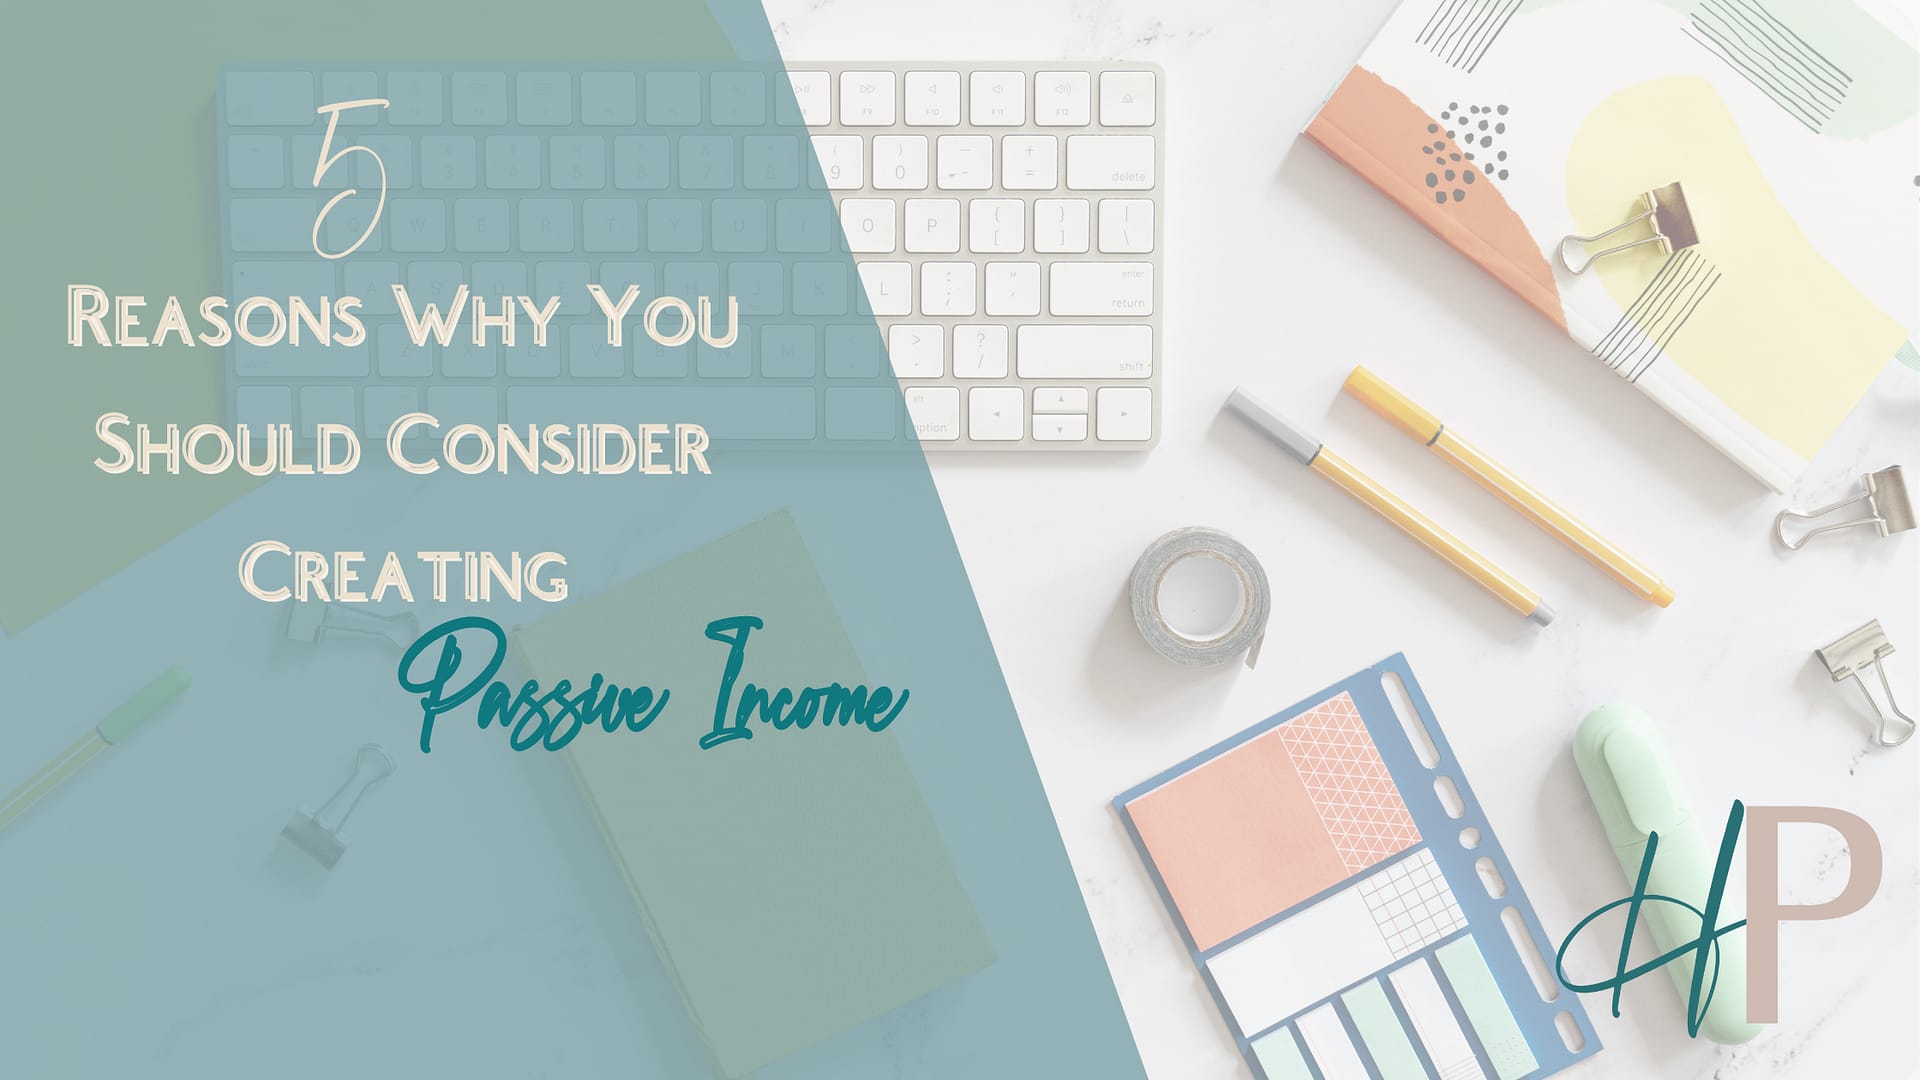 5 Reasons Why You Should Consider Creating a Passive Income